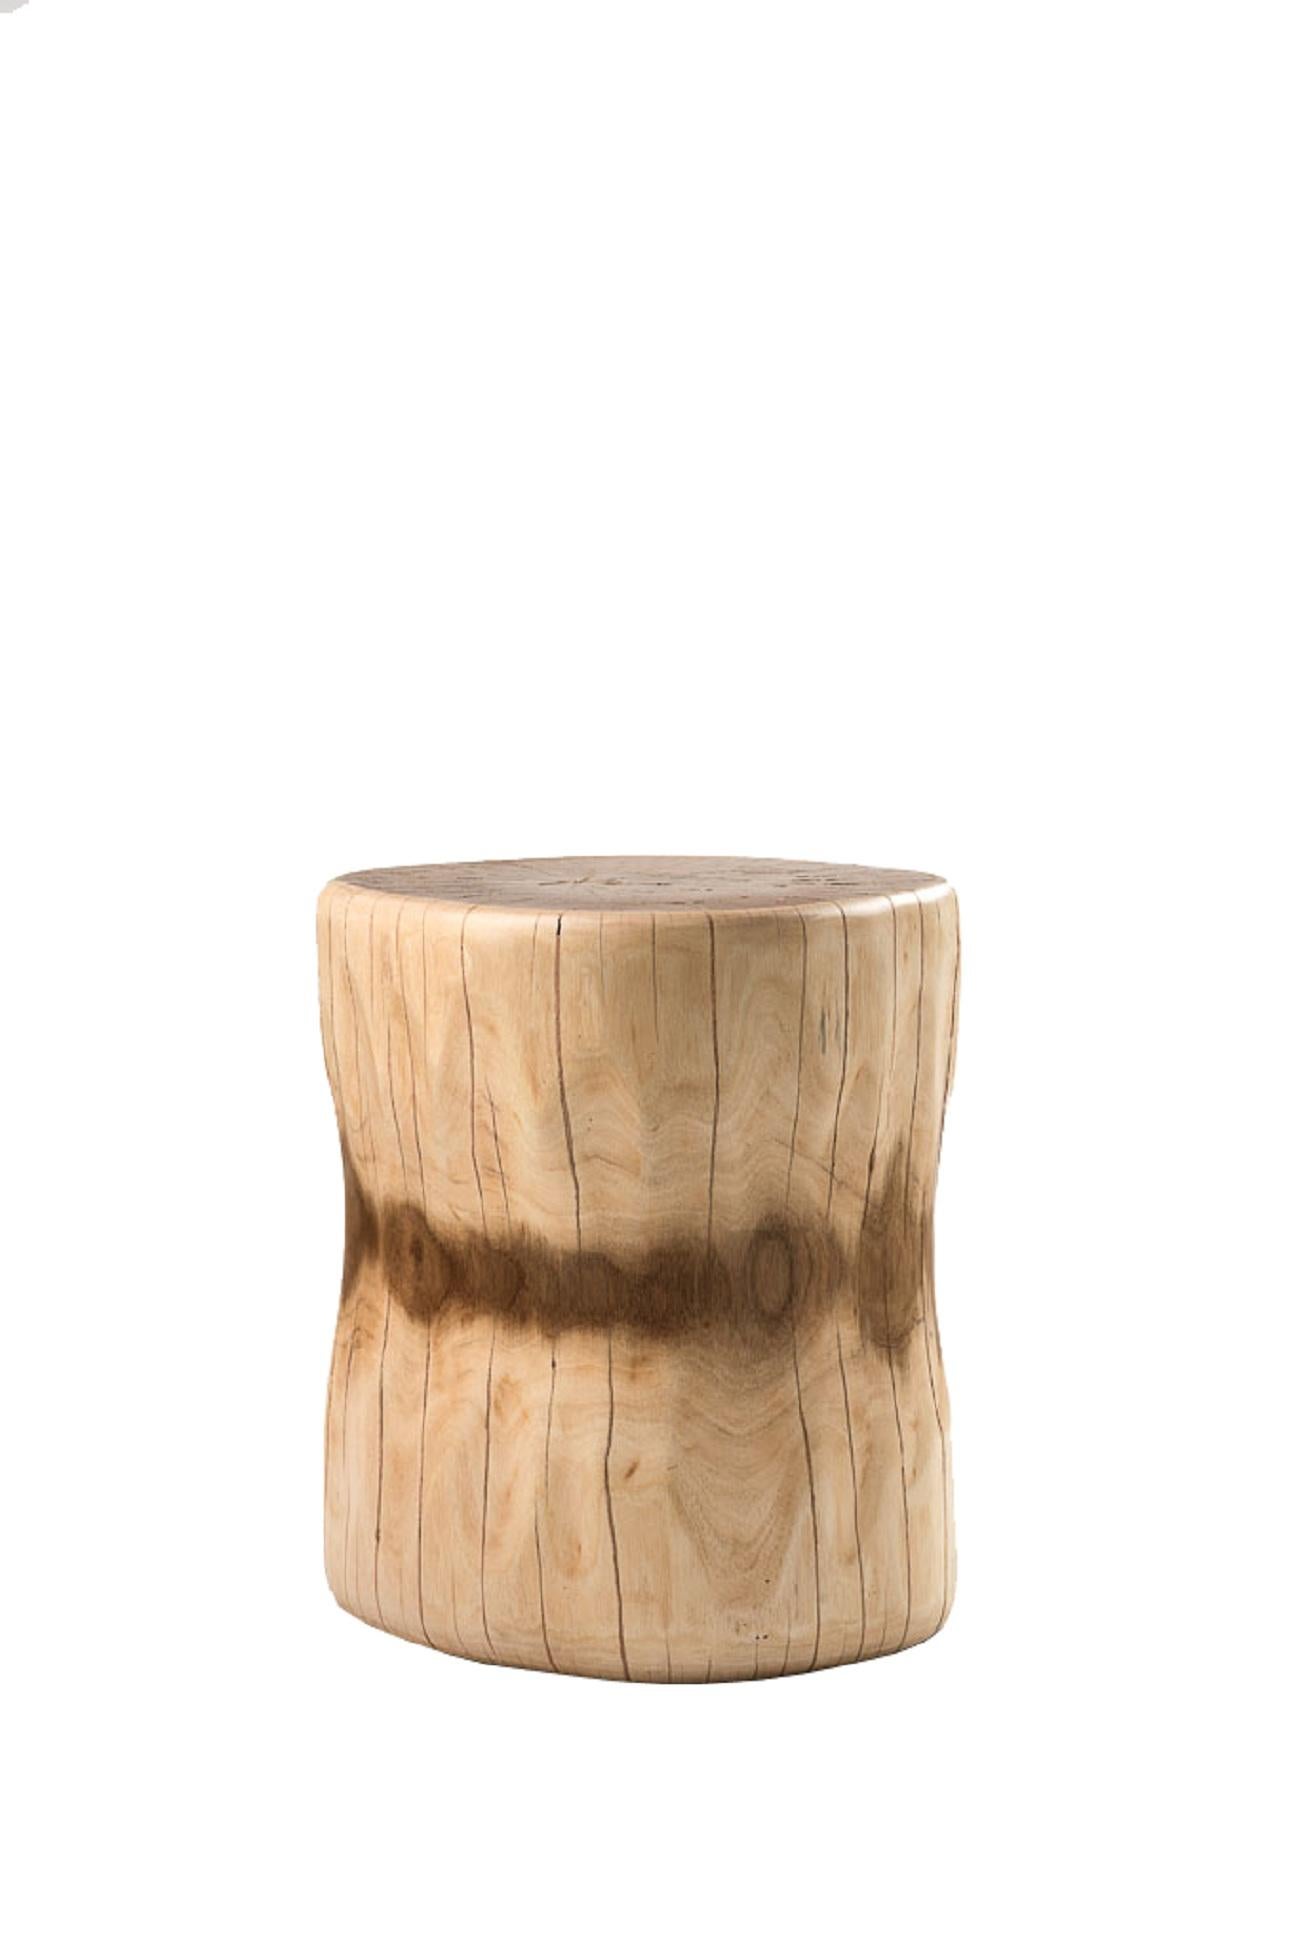 Modern Bone Carved Solid Wooden Stump by Kunaal Kyhaan For Sale